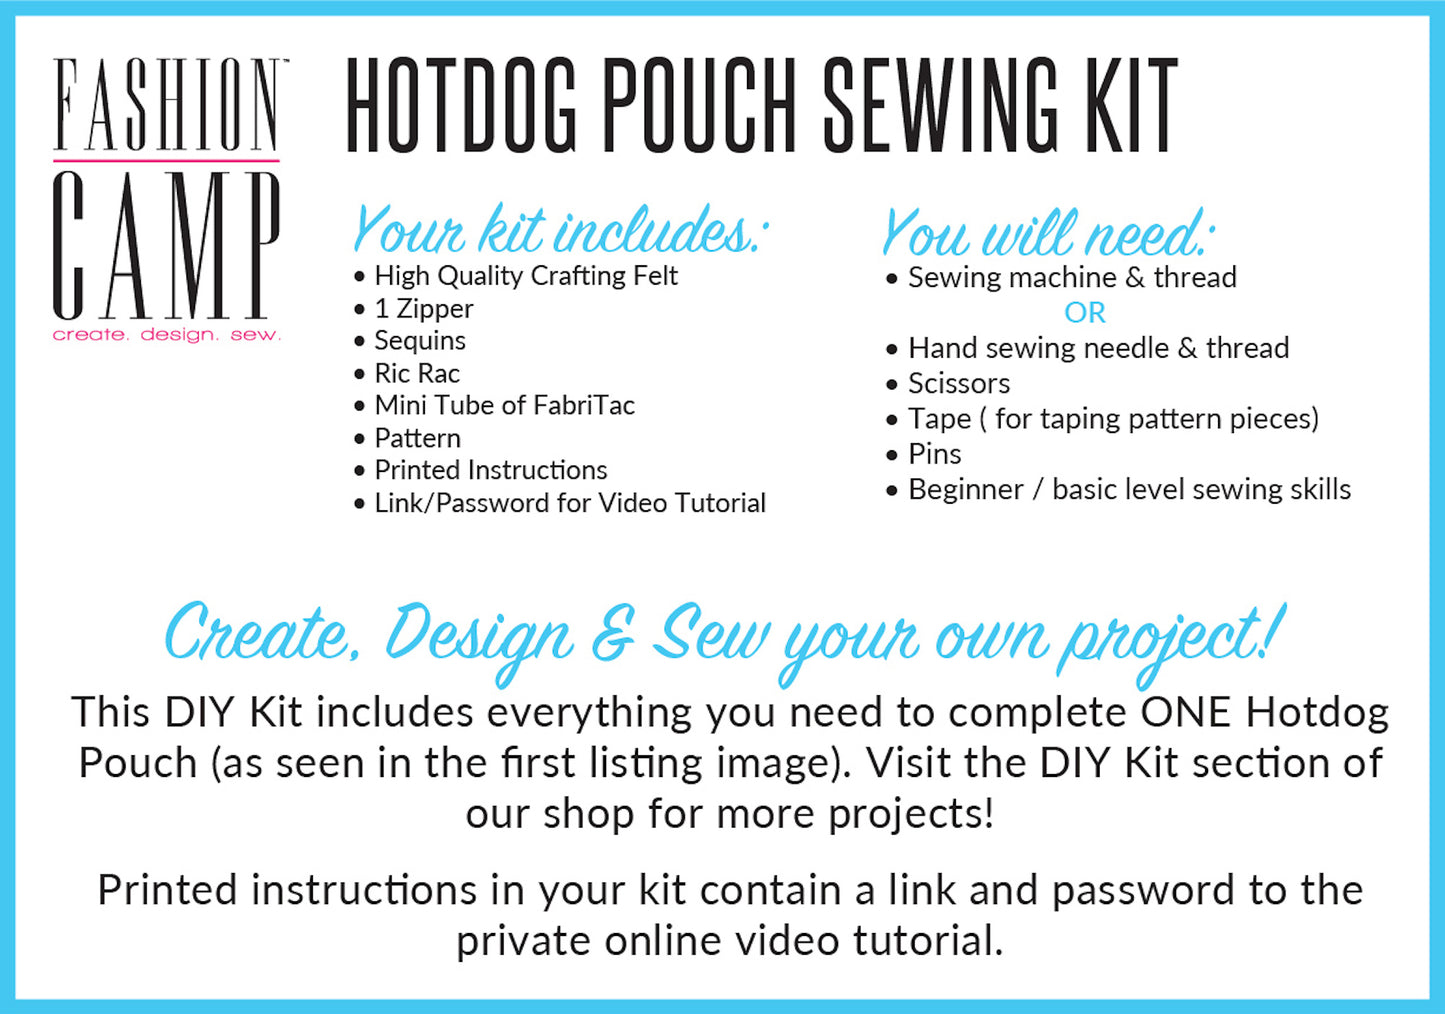 DIY Hot Dog Pouch Sewing Kit & Video Tutorial